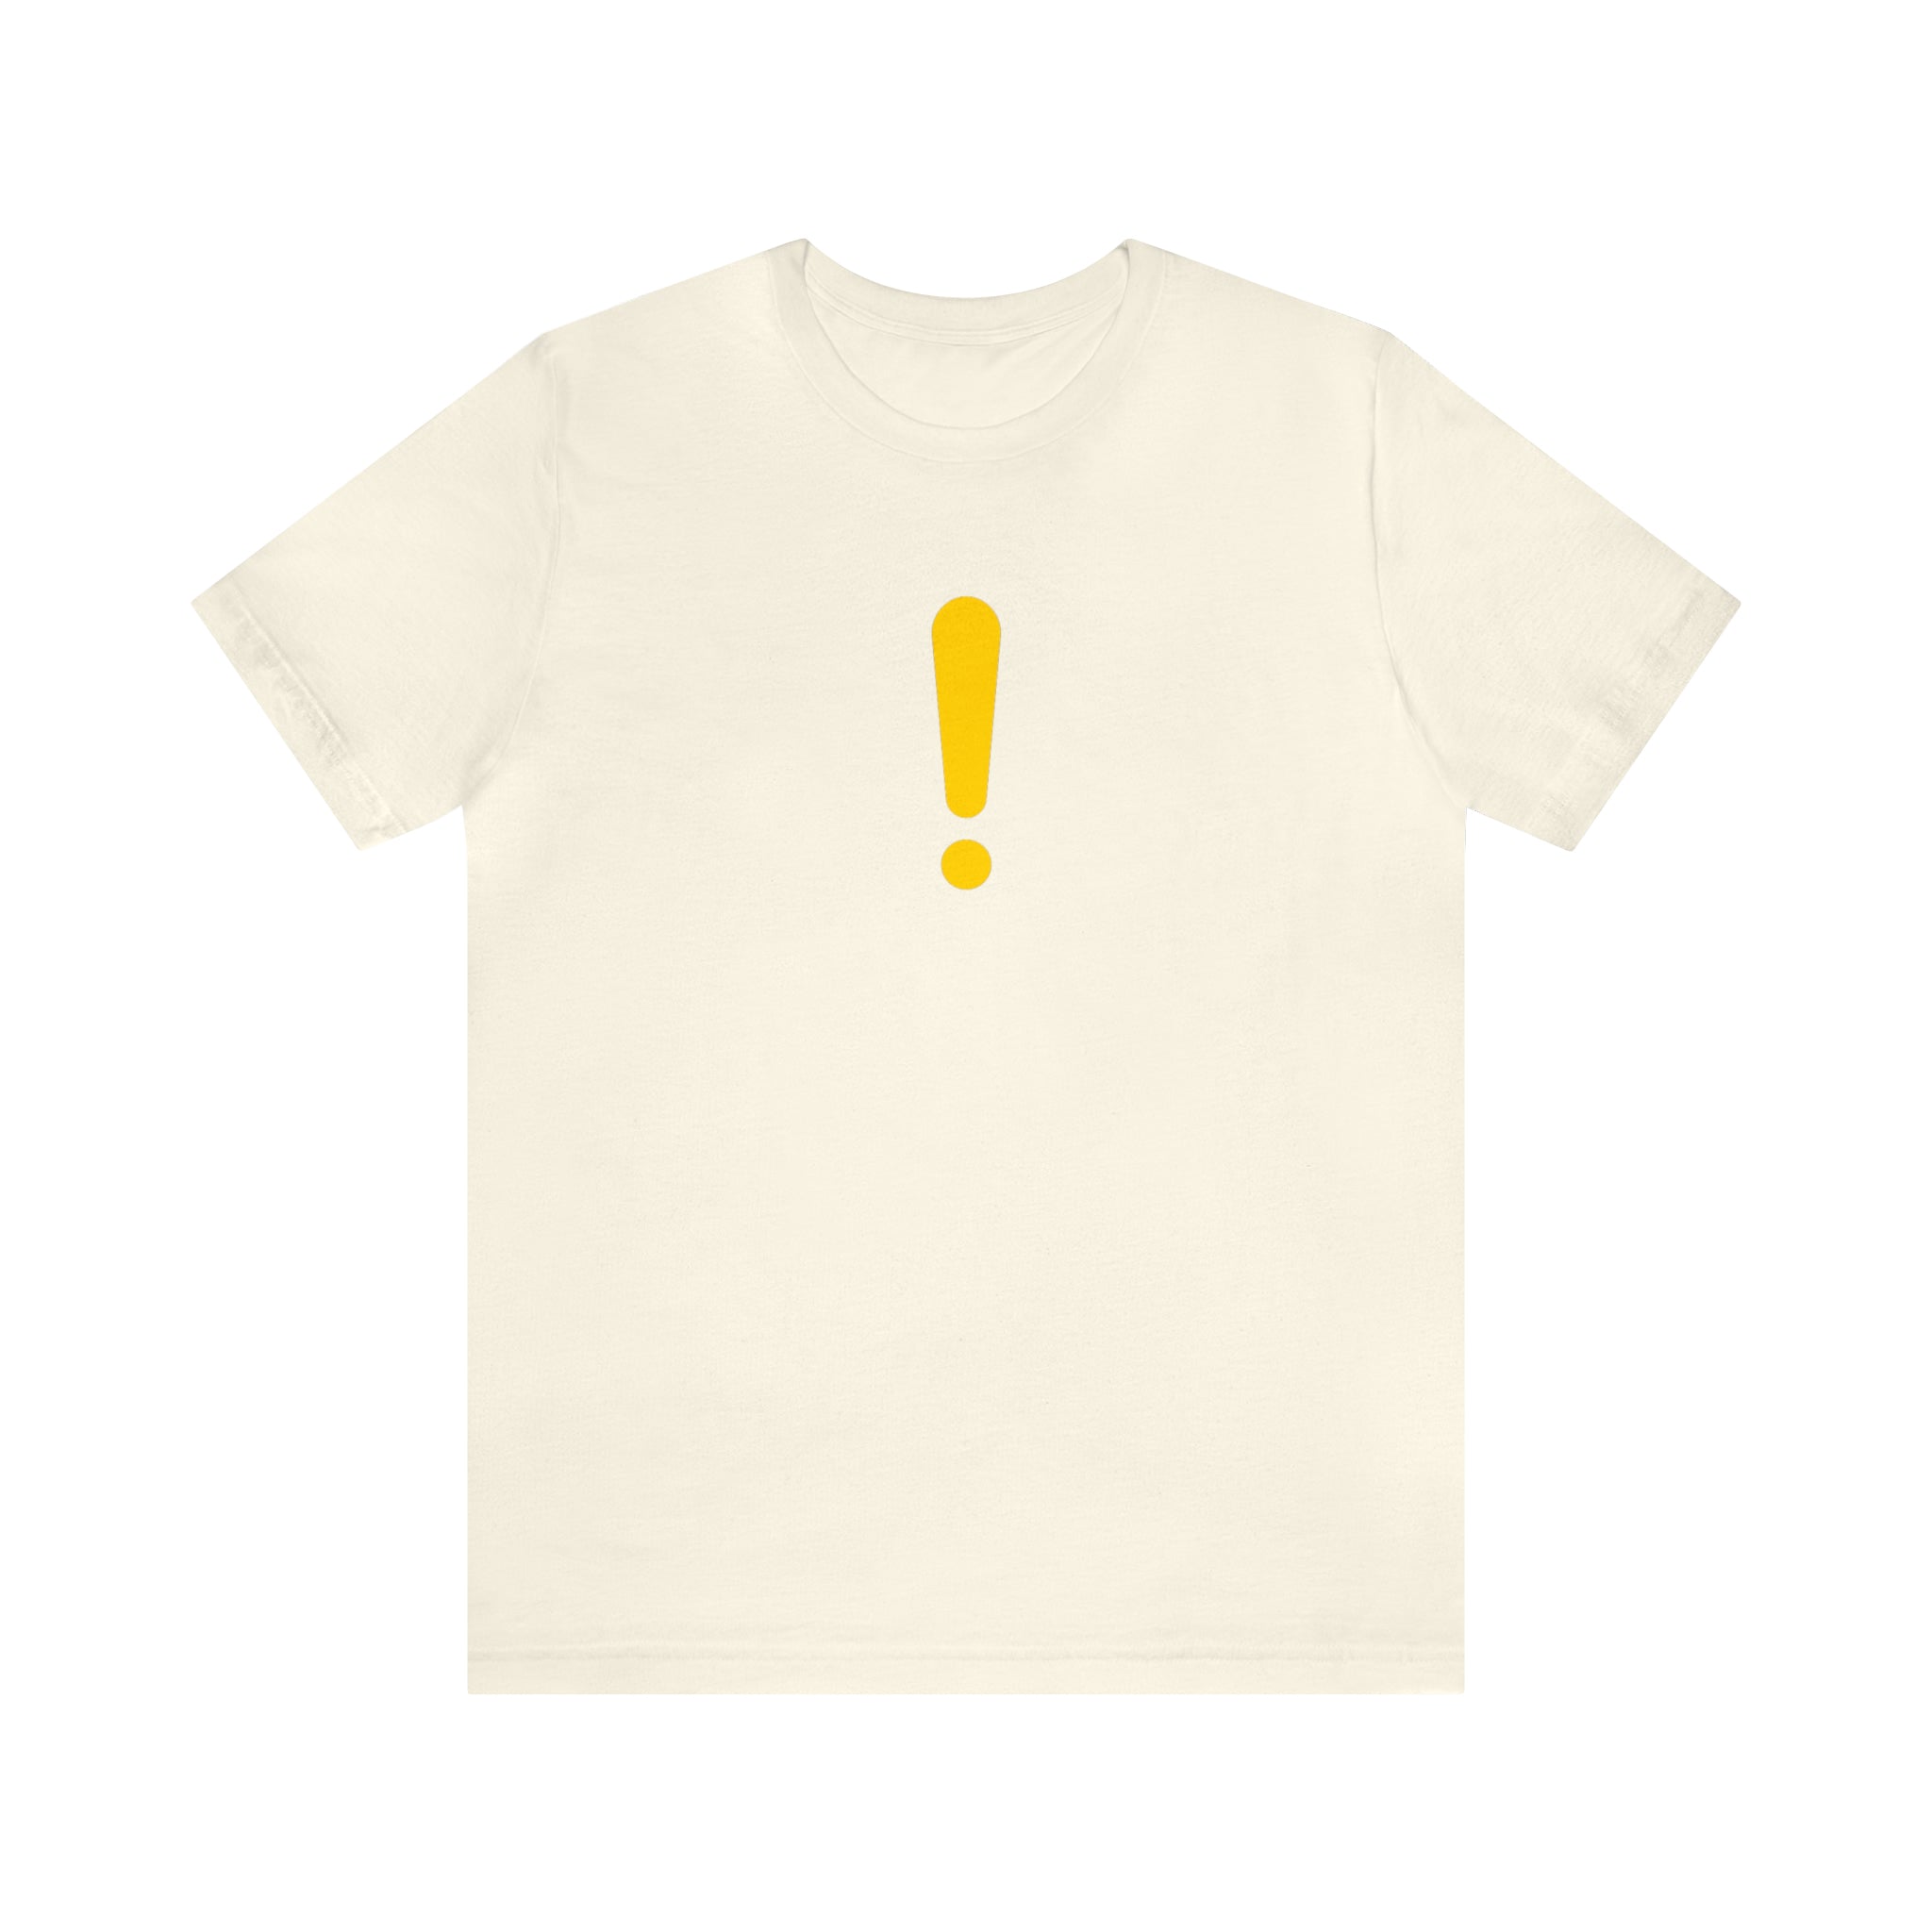 Yellow Exclamation T-Shirt | Gift for Gamers, Gamer Shirt, Nerdy Gifts, Video Gamer T-Shirt